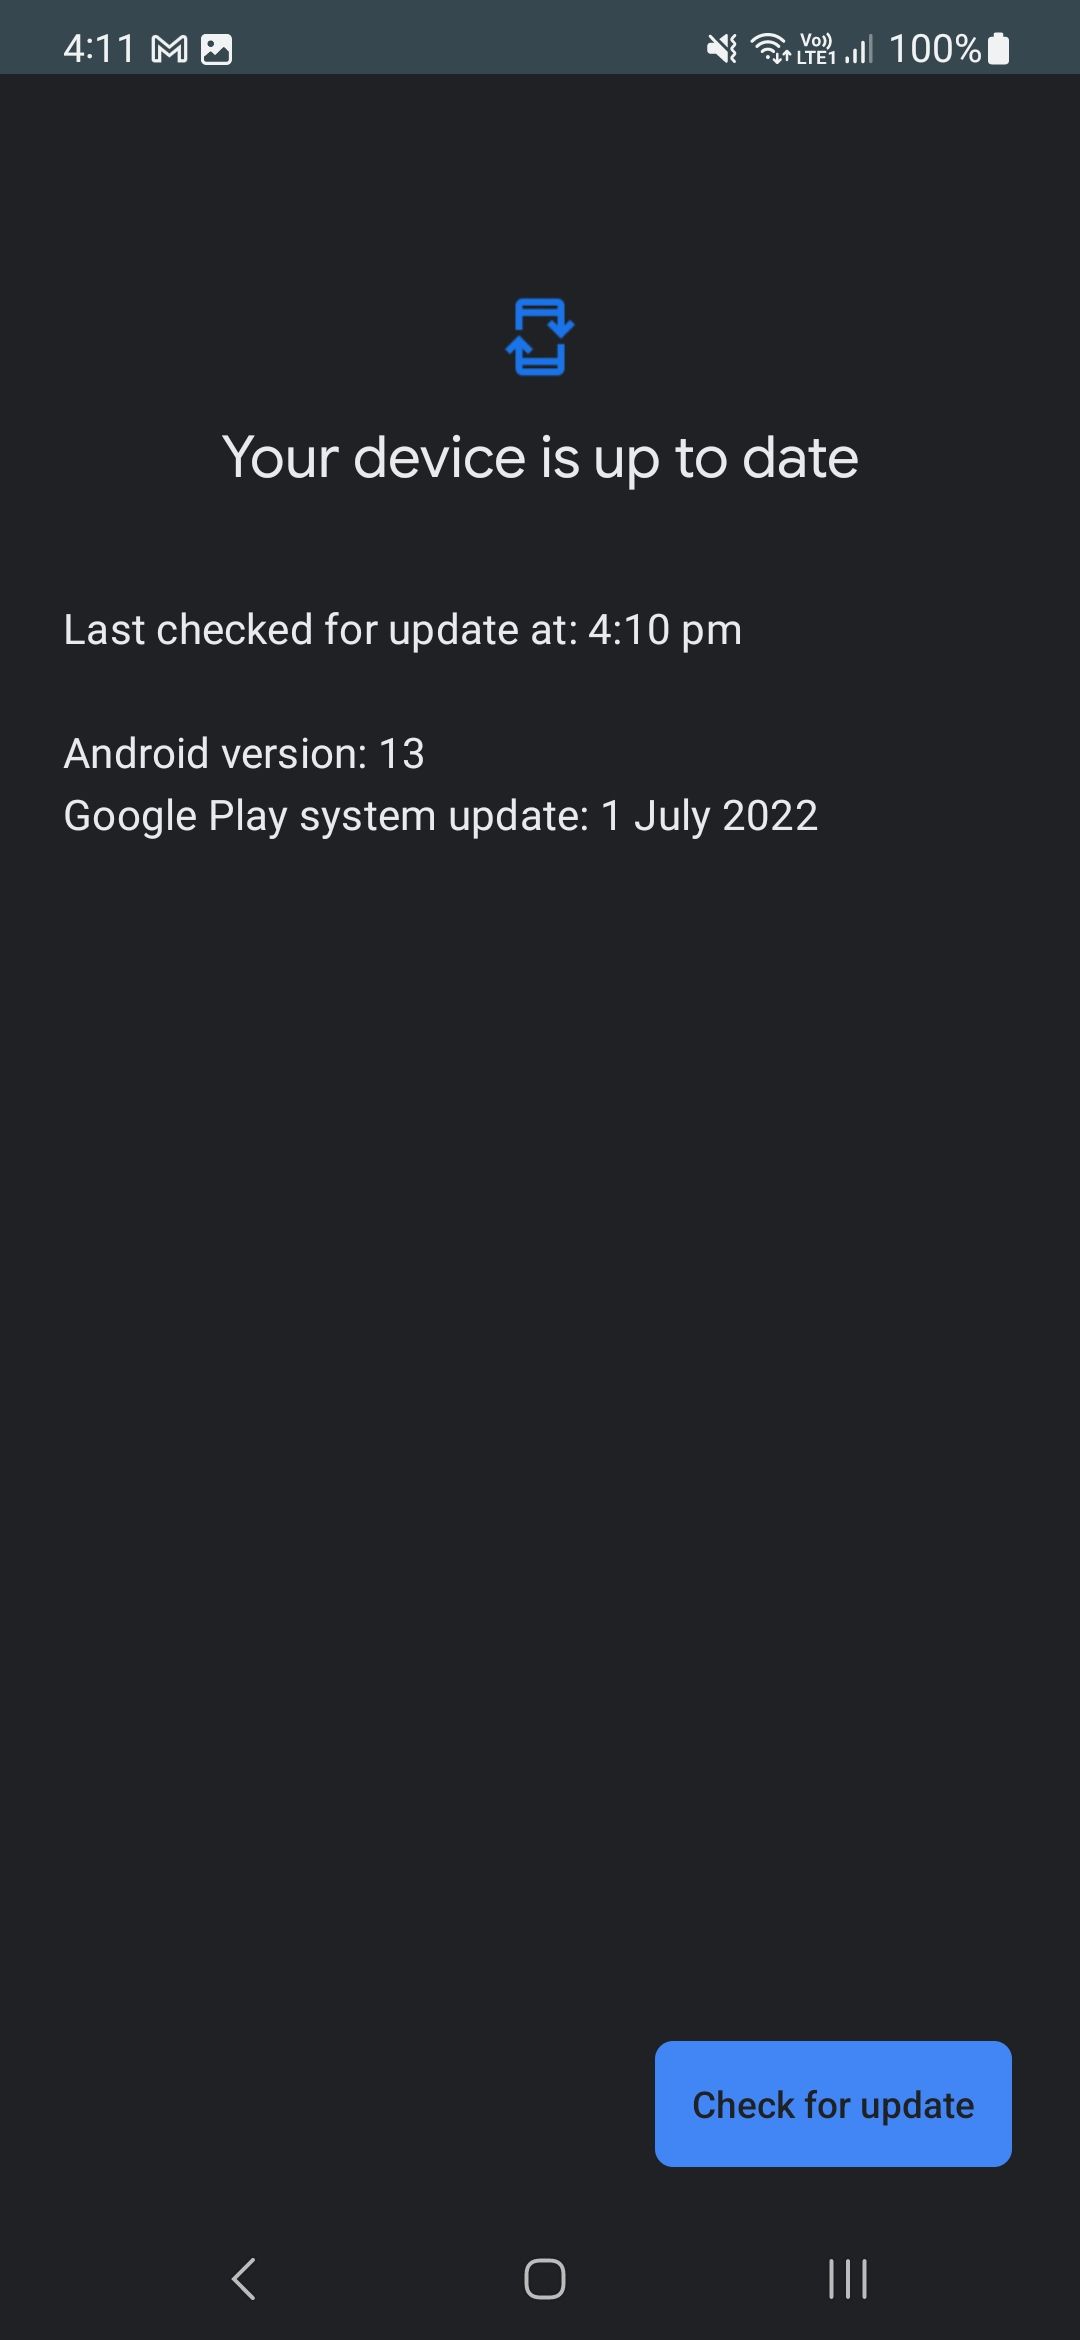 Google Play system update page